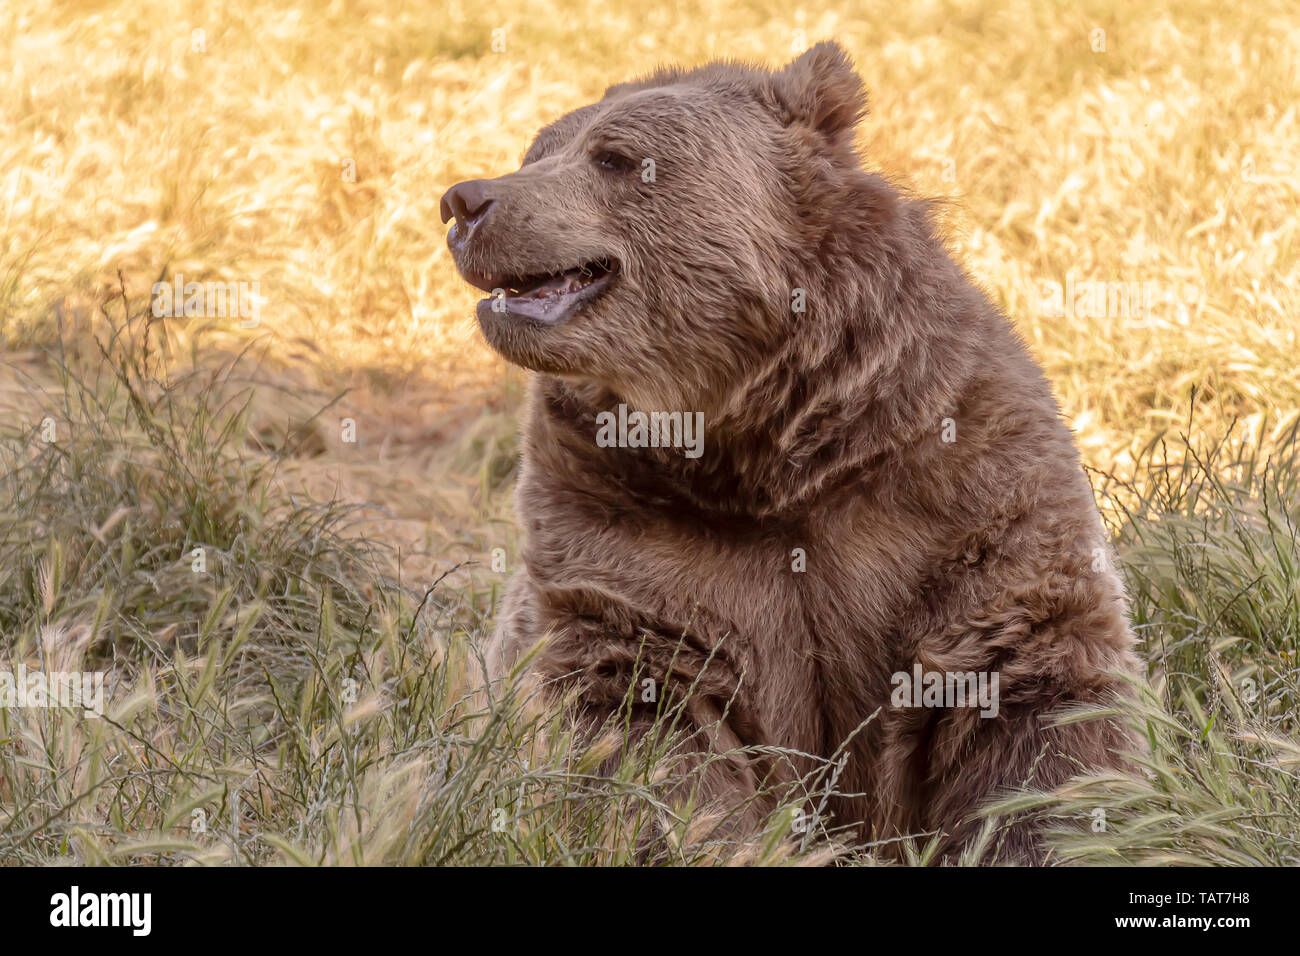 An elderly brown bear rests in a field in Washington State. Stock Photo